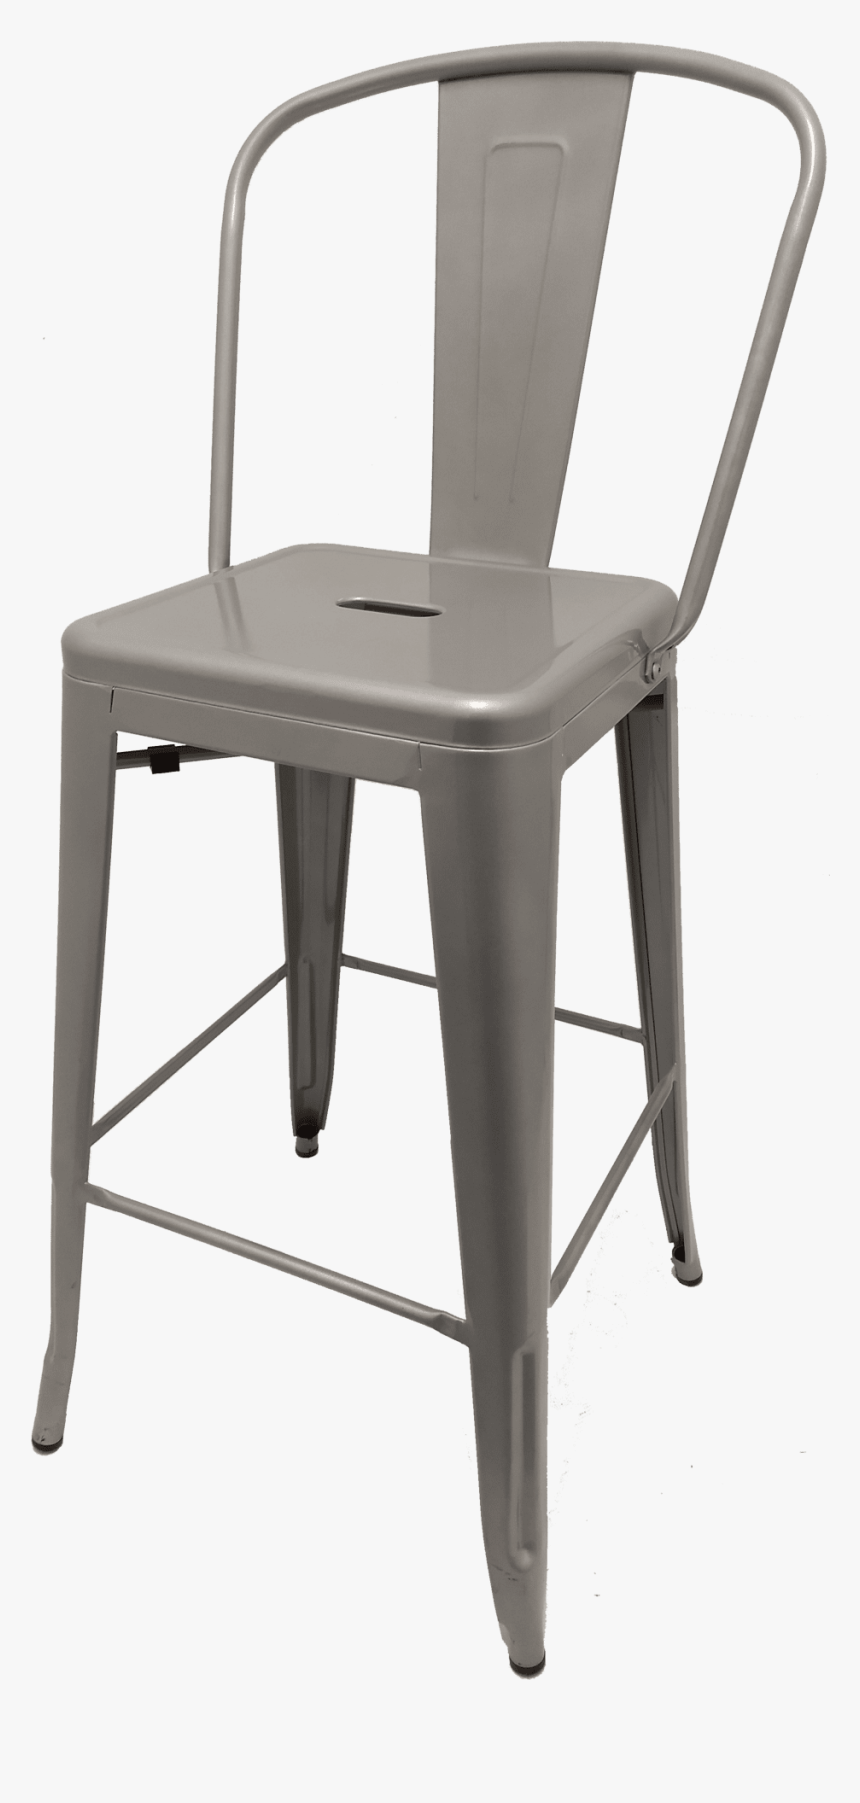 Xl Brewhouse Barstool With Back In Silver Bullet Finish - H01 8037 G2 Bar Stool, HD Png Download, Free Download